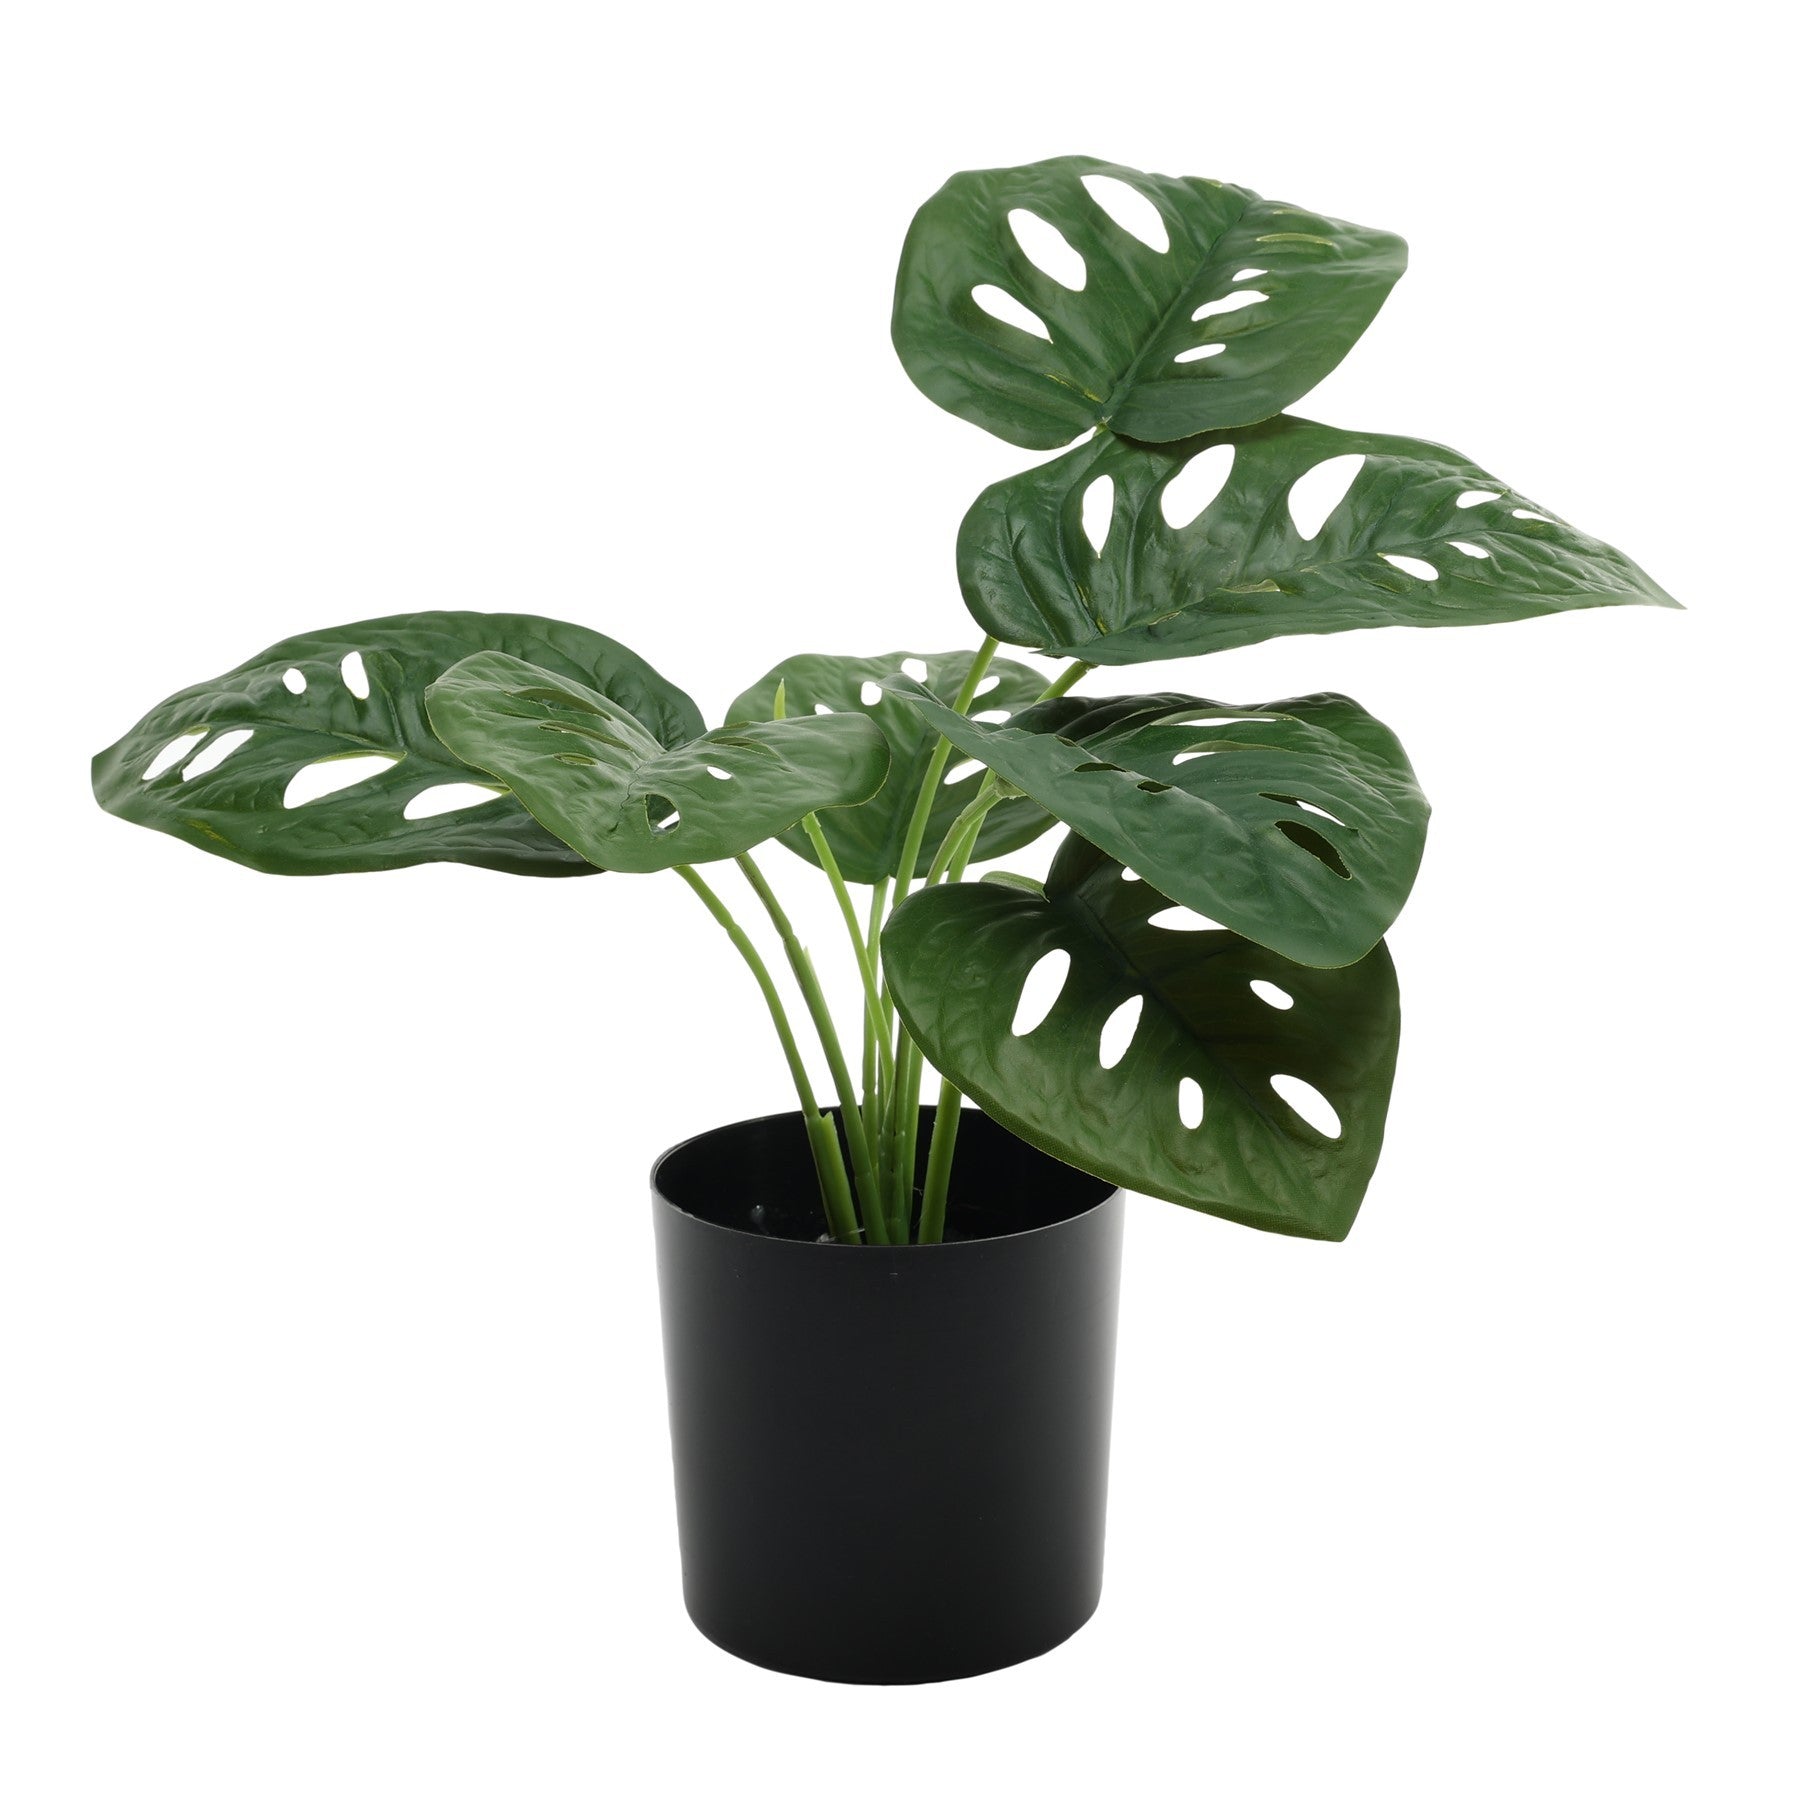 View Monstera Potted House Plant 40cm information